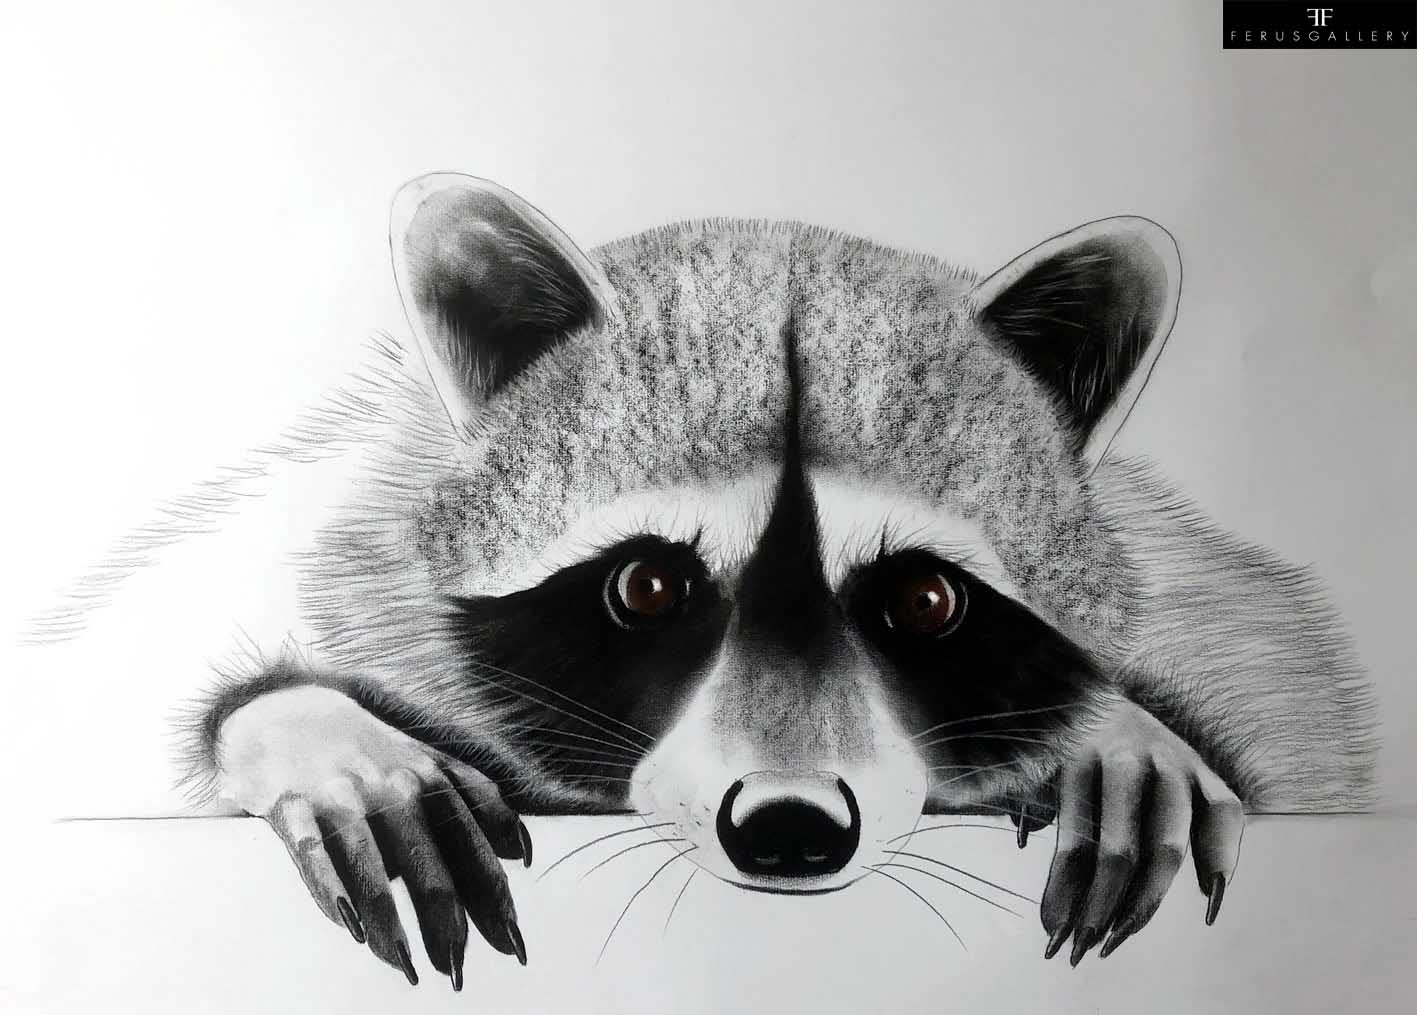 Racoon 3 drawing by Thierry Bisch